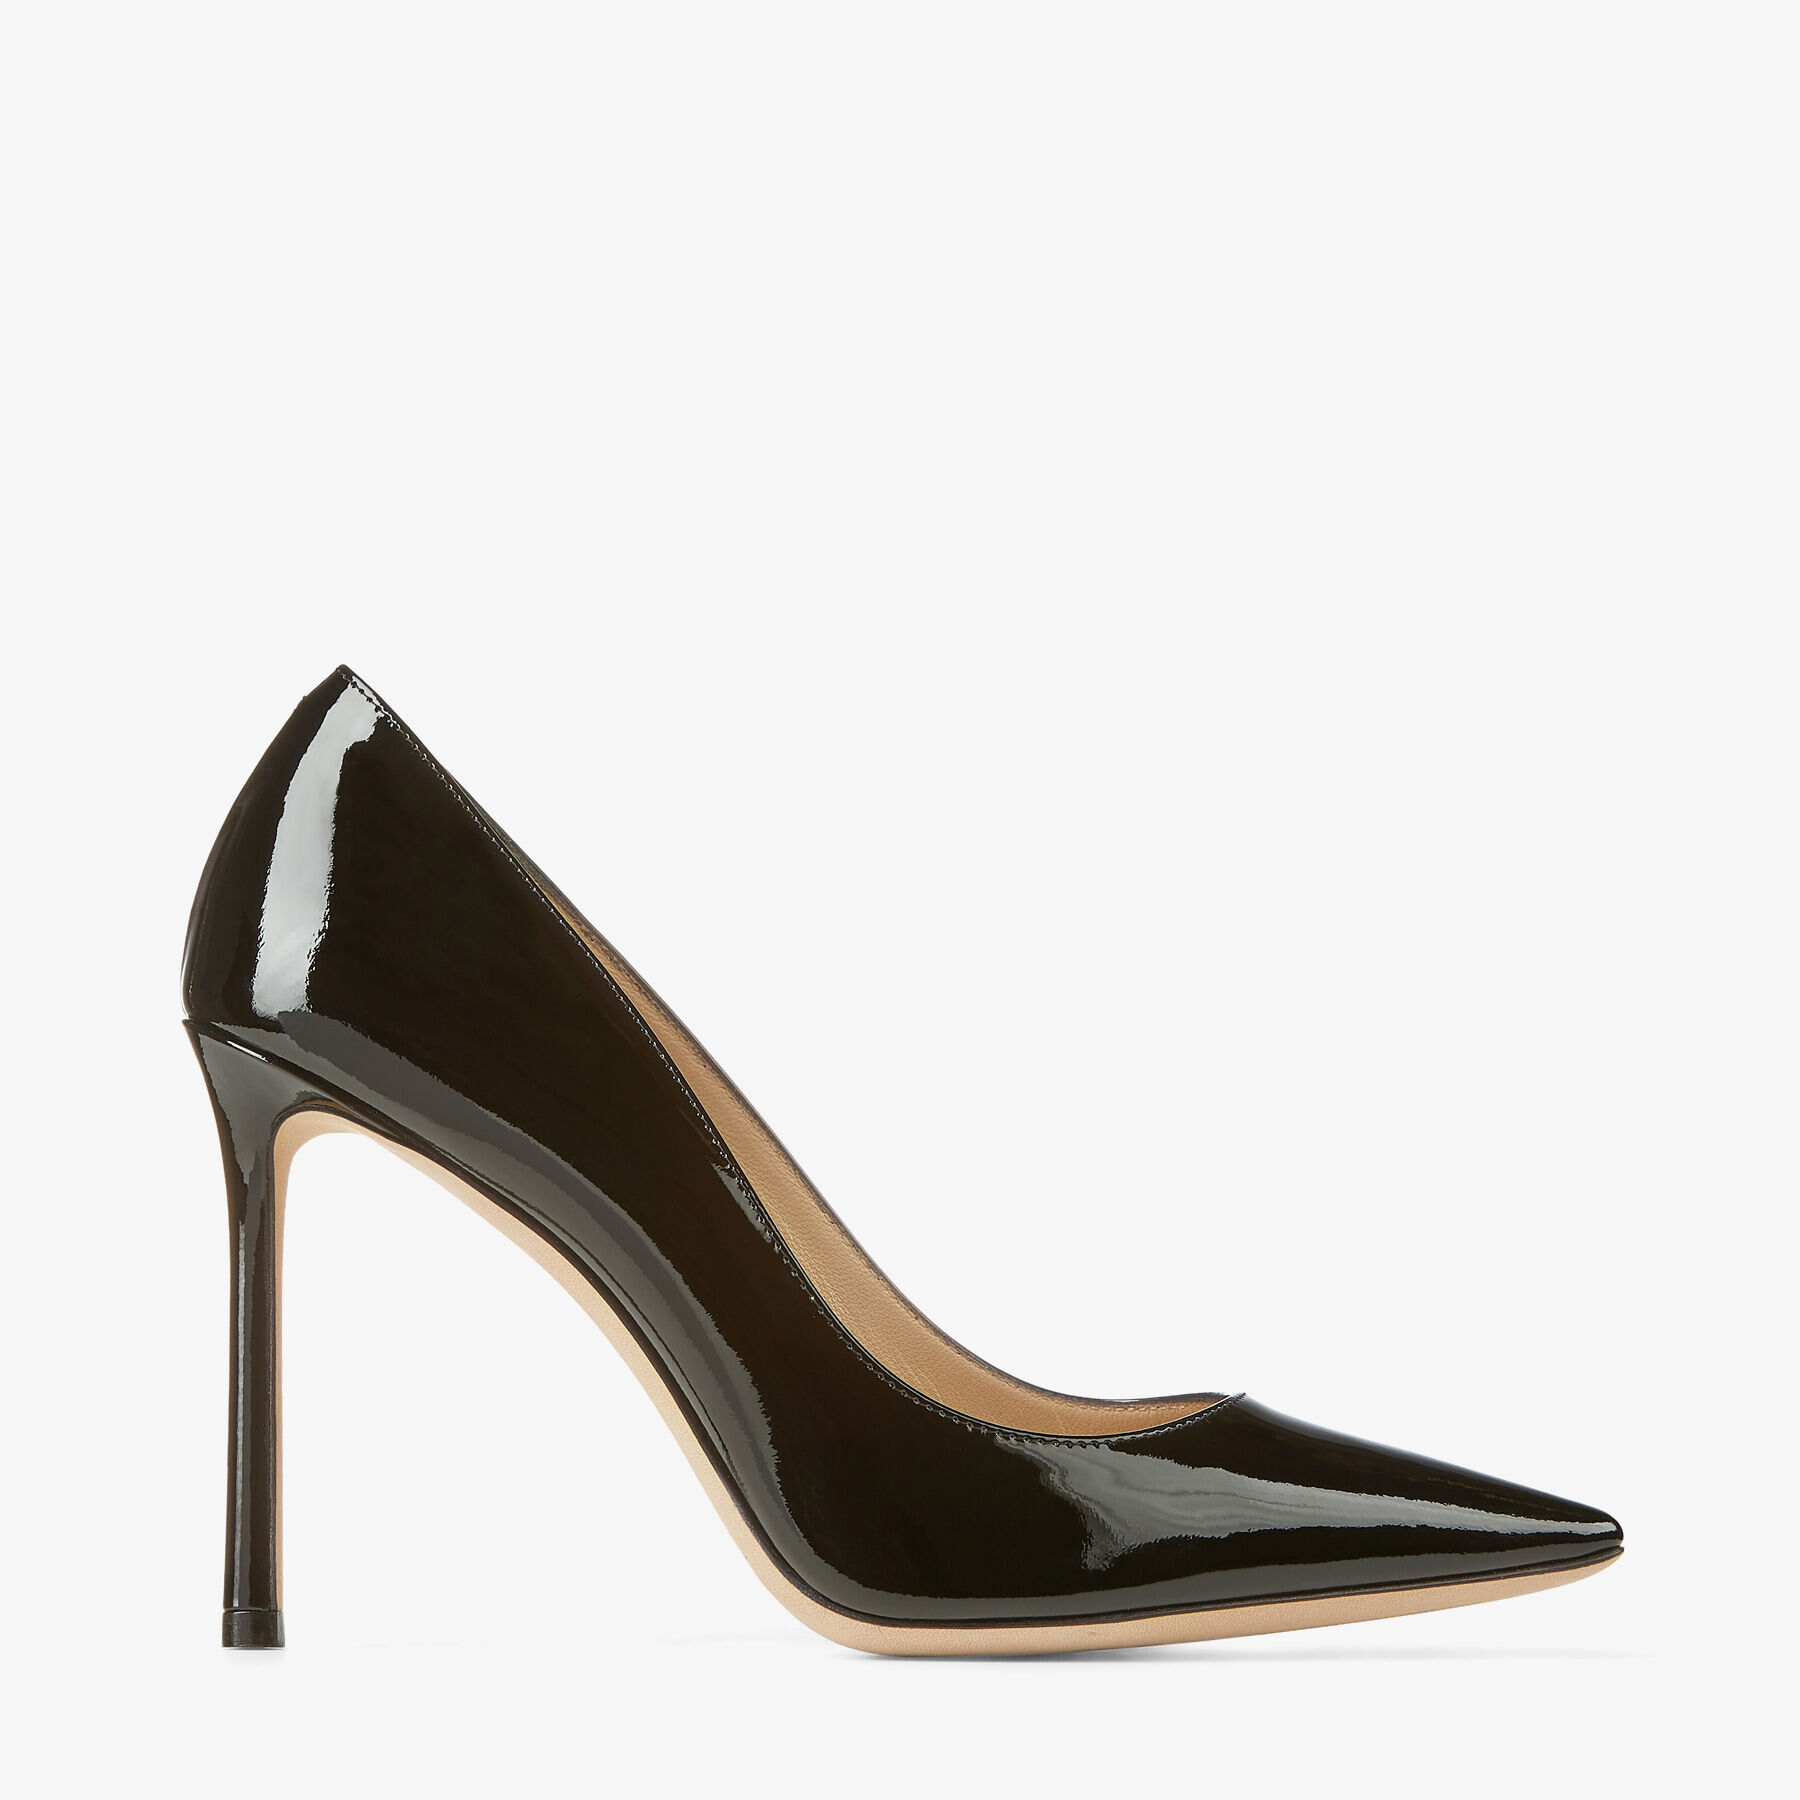 Black Patent Leather Pointy Toe Pumps, Romy 100